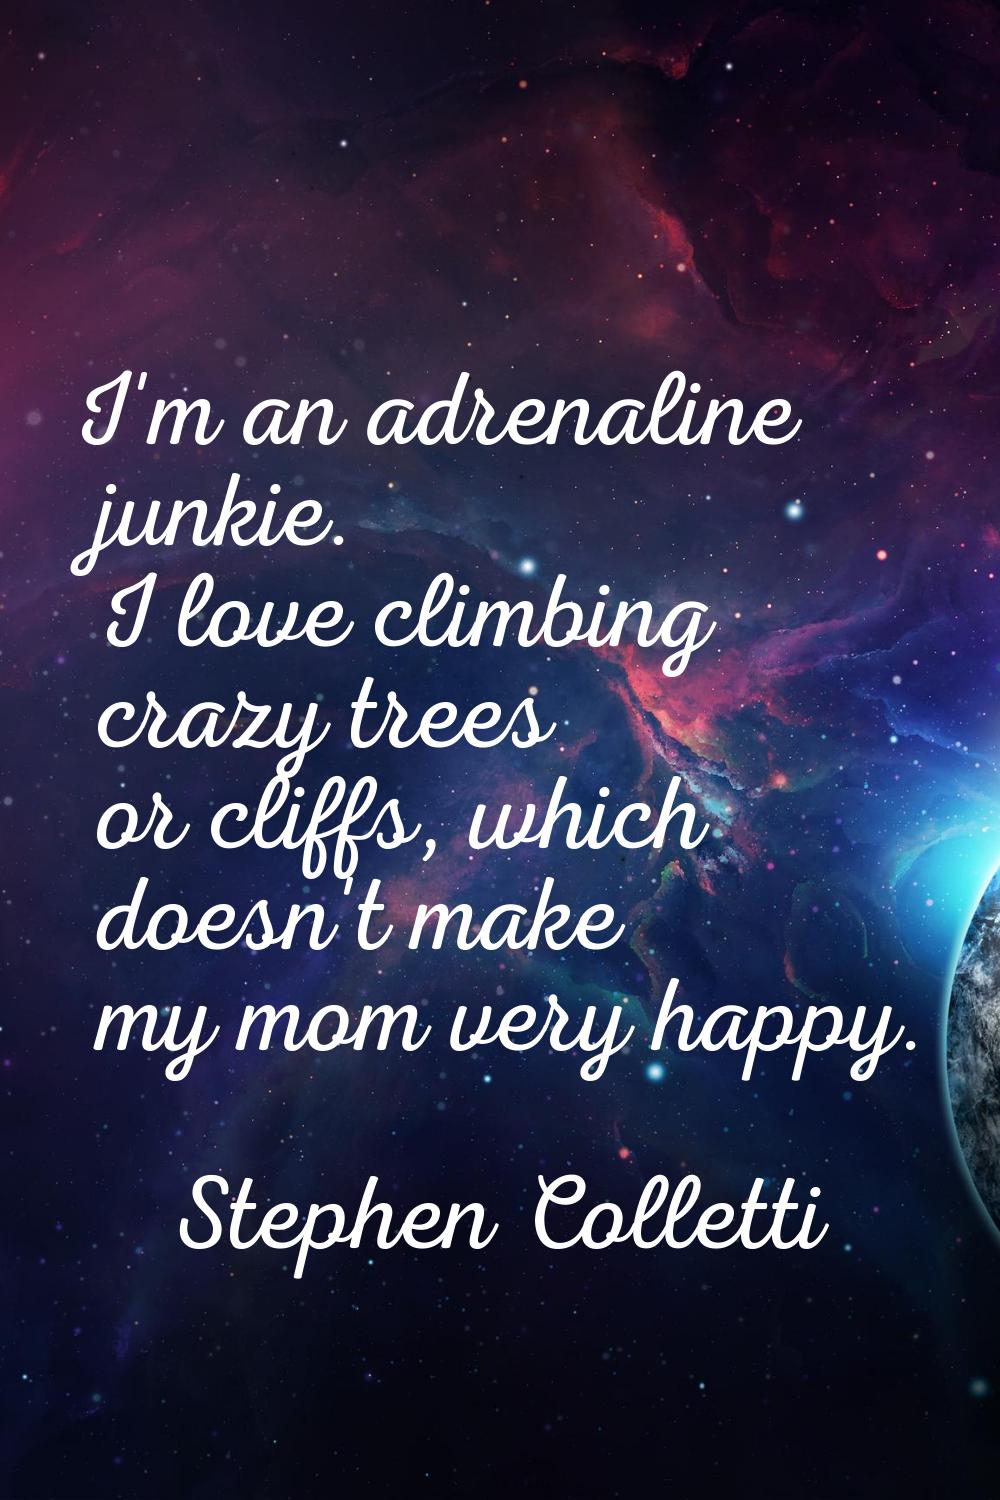 I'm an adrenaline junkie. I love climbing crazy trees or cliffs, which doesn't make my mom very hap